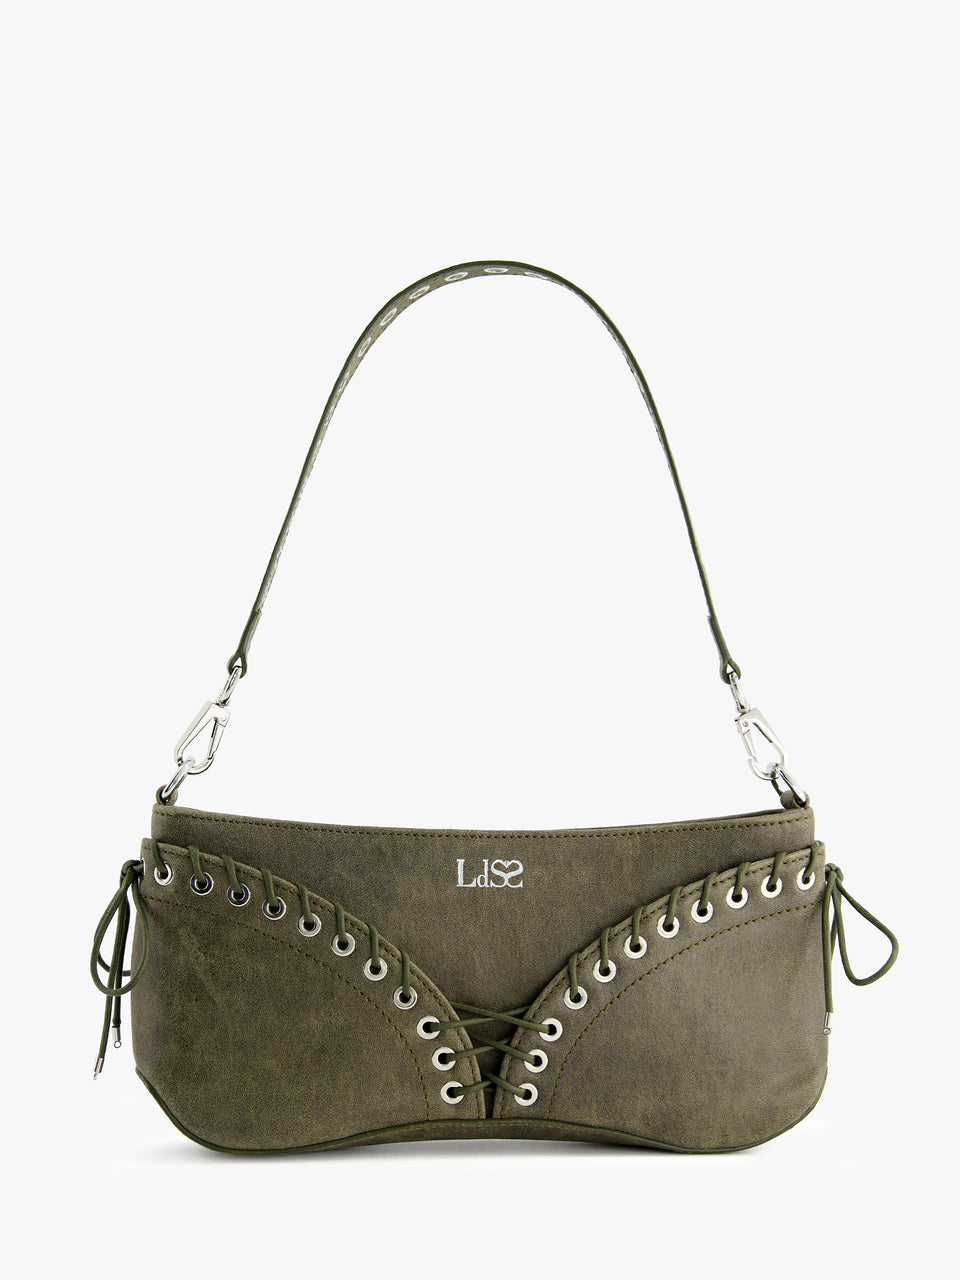 The Cleavage Bag in Khaki Leather